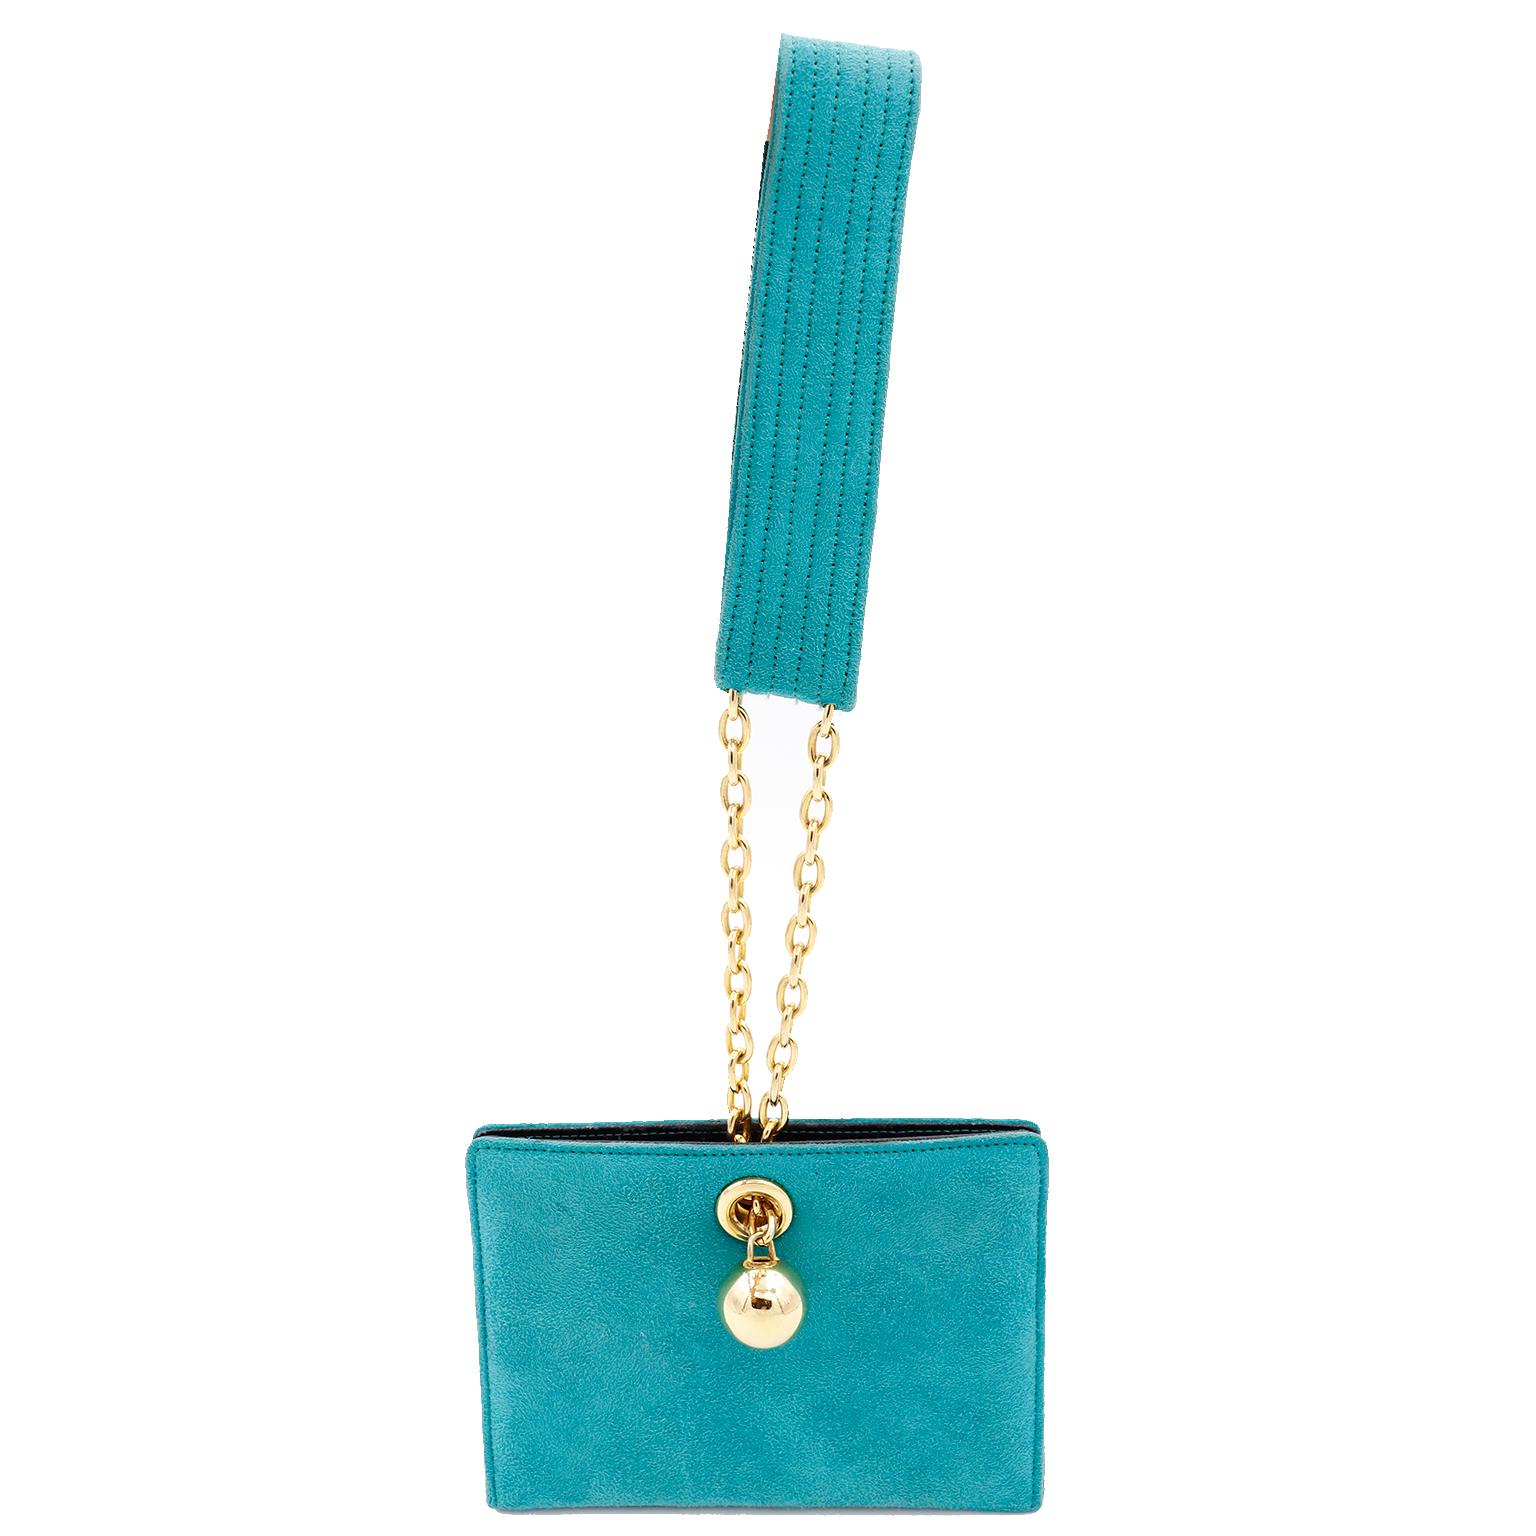 This fun 1980's vintage Jean Claude Jitrois green suede bag has a wrist loop handle that is attached to a gold link chain. The chain has chunky gold balls on the end, making it almost like a piece of jewelry! There are 2 inner snaps for closure and